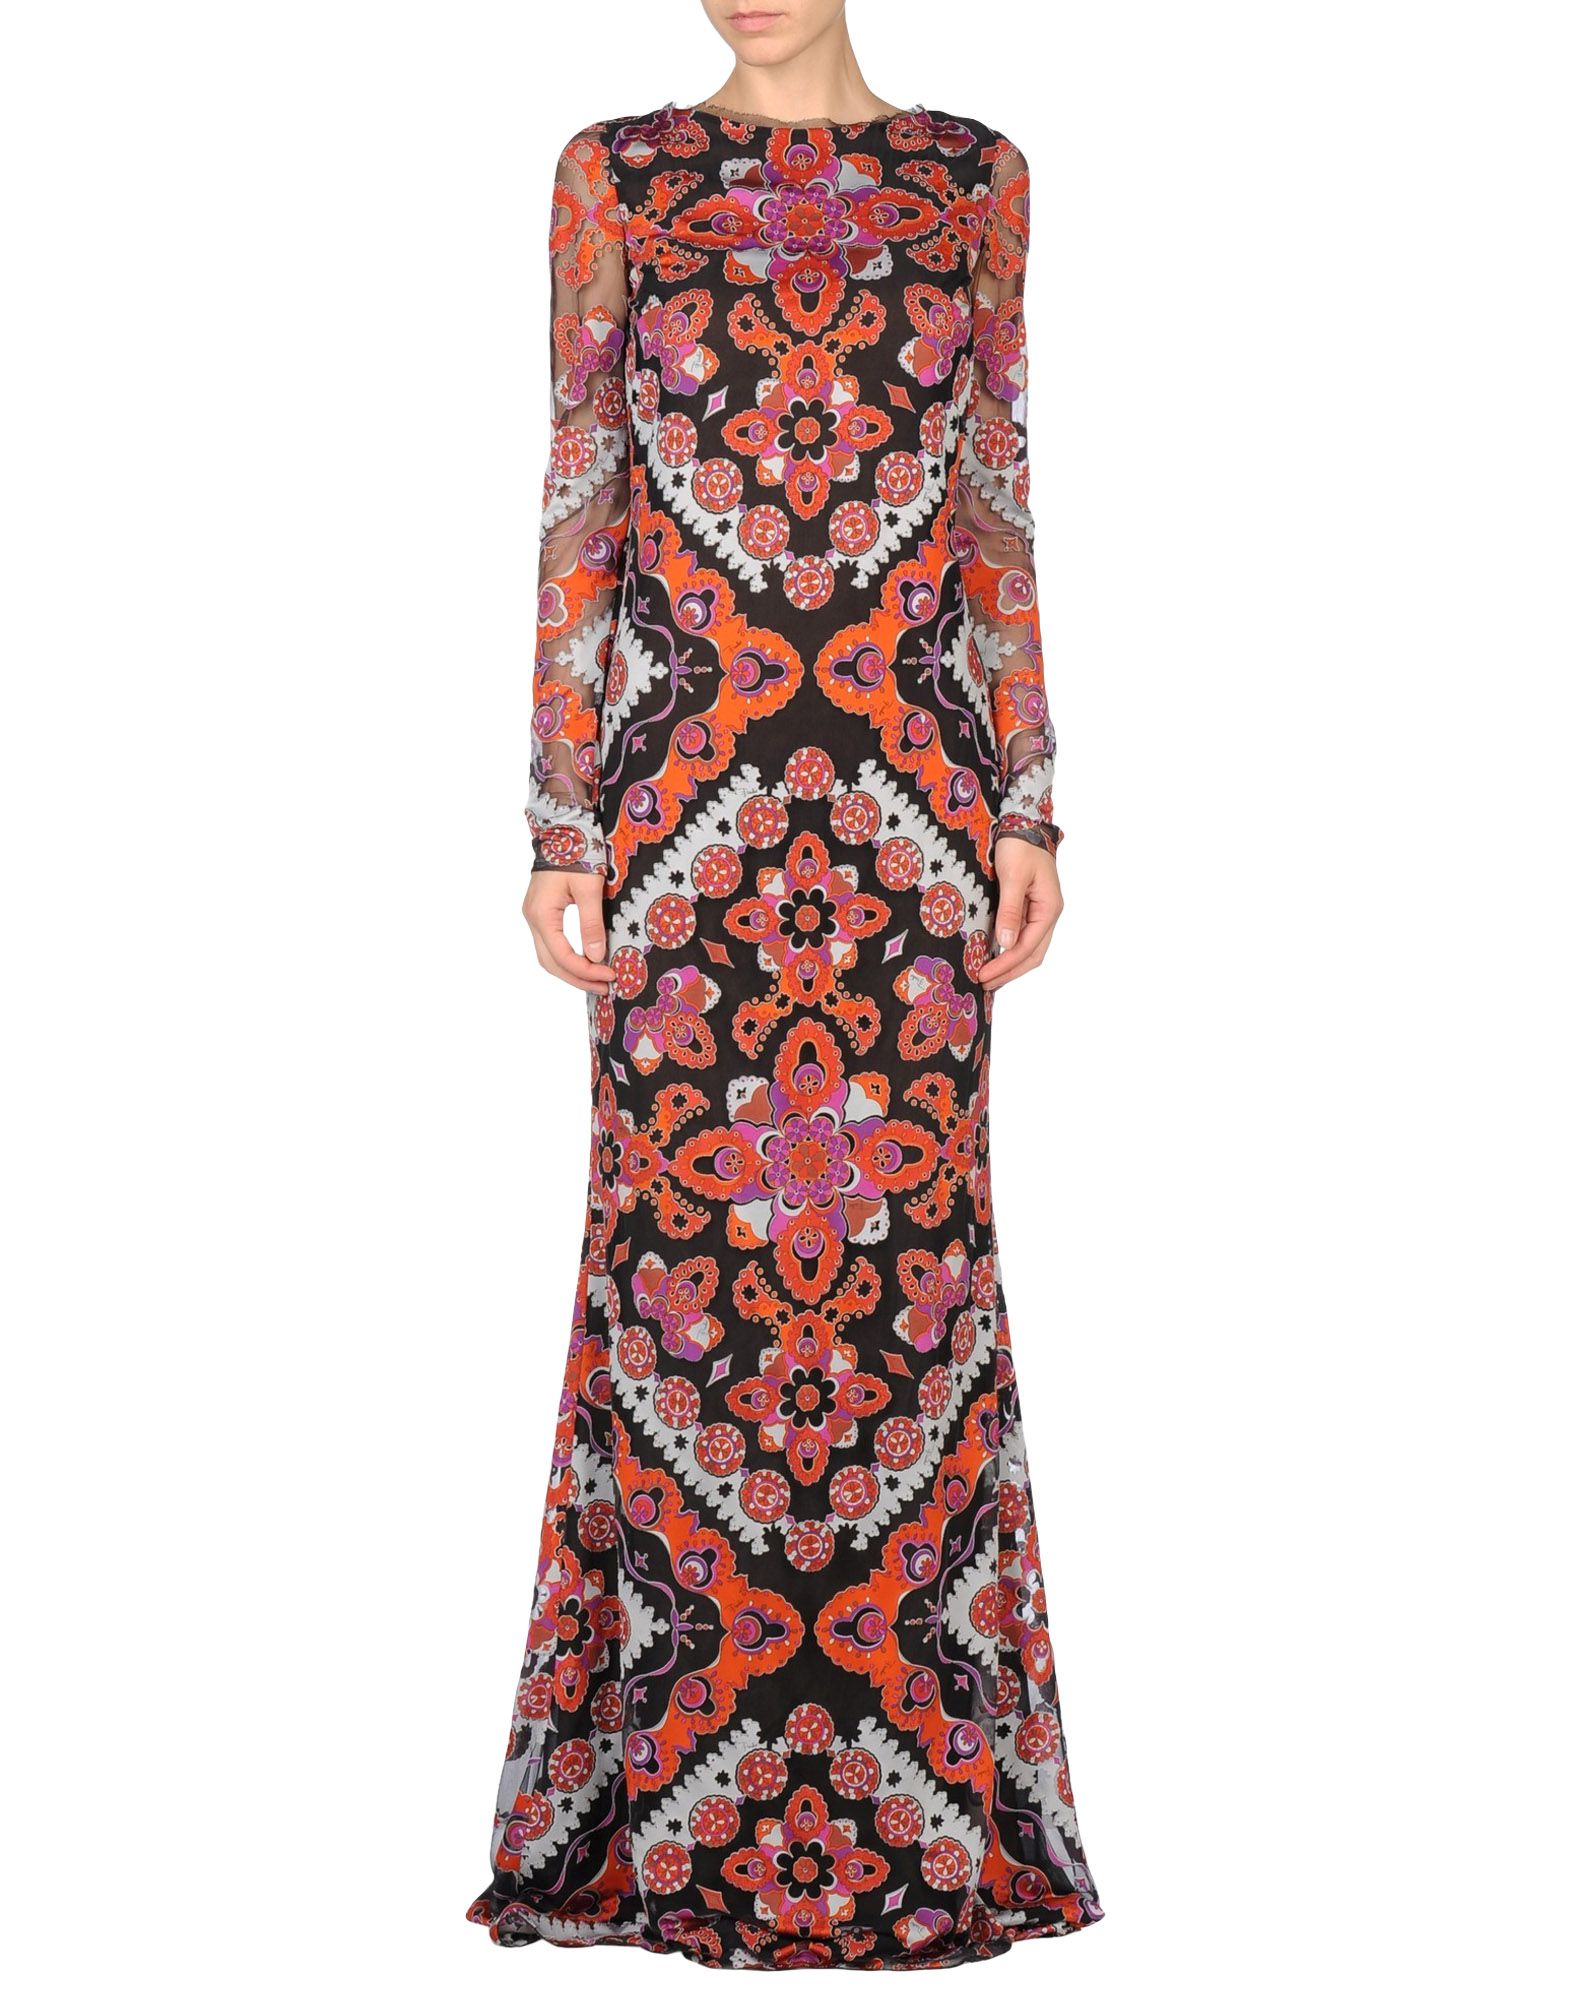 Lyst - Emilio Pucci One Shoulder Butterfly Print Long Dress in Pink